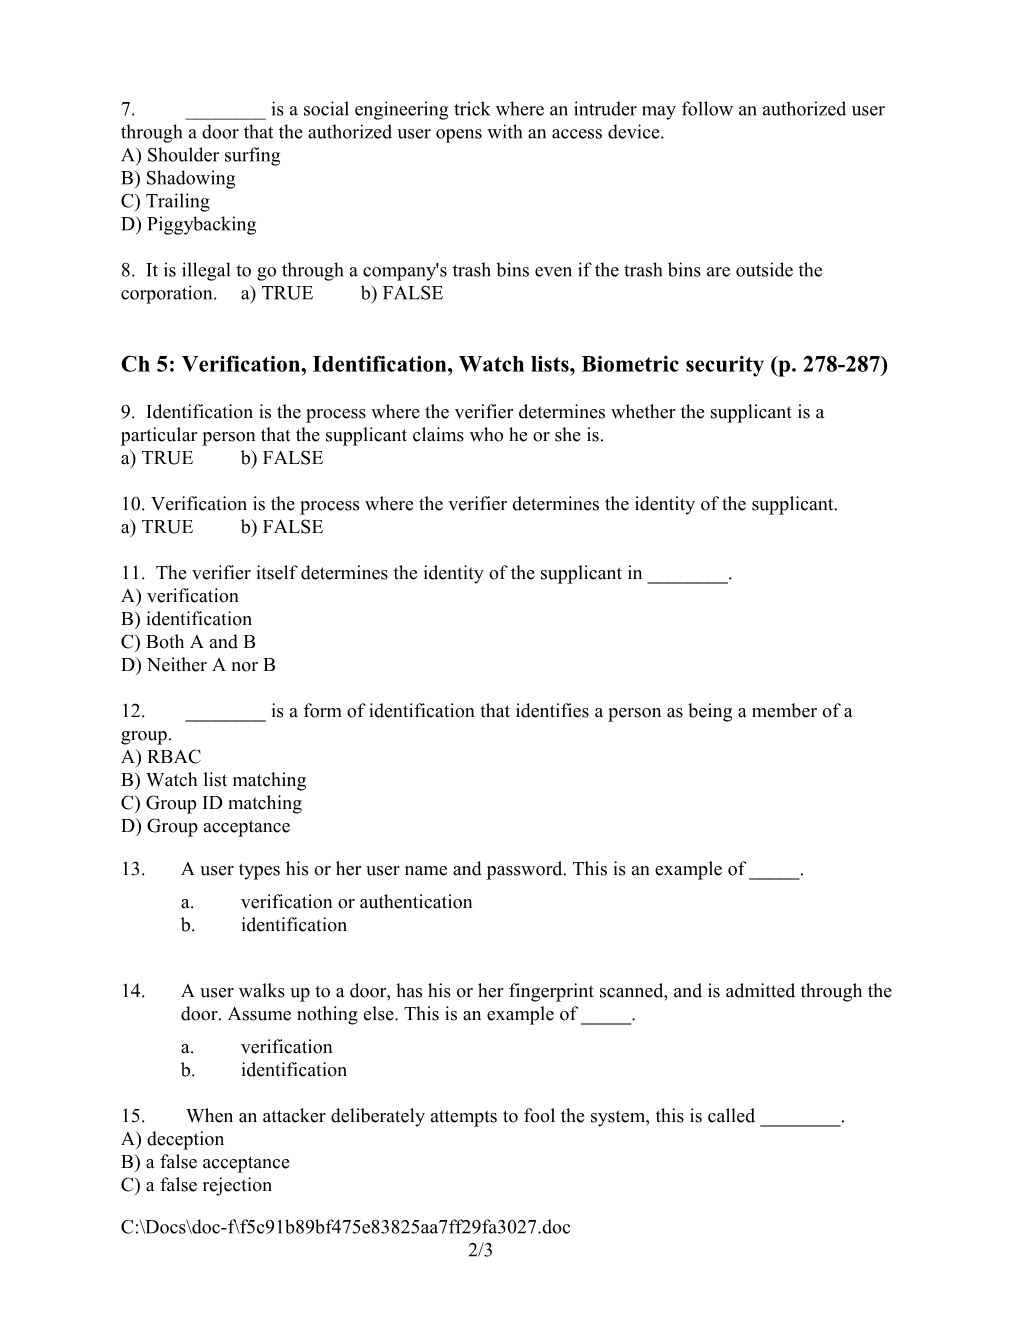 Review Questions Chapter 5-2 Access Control